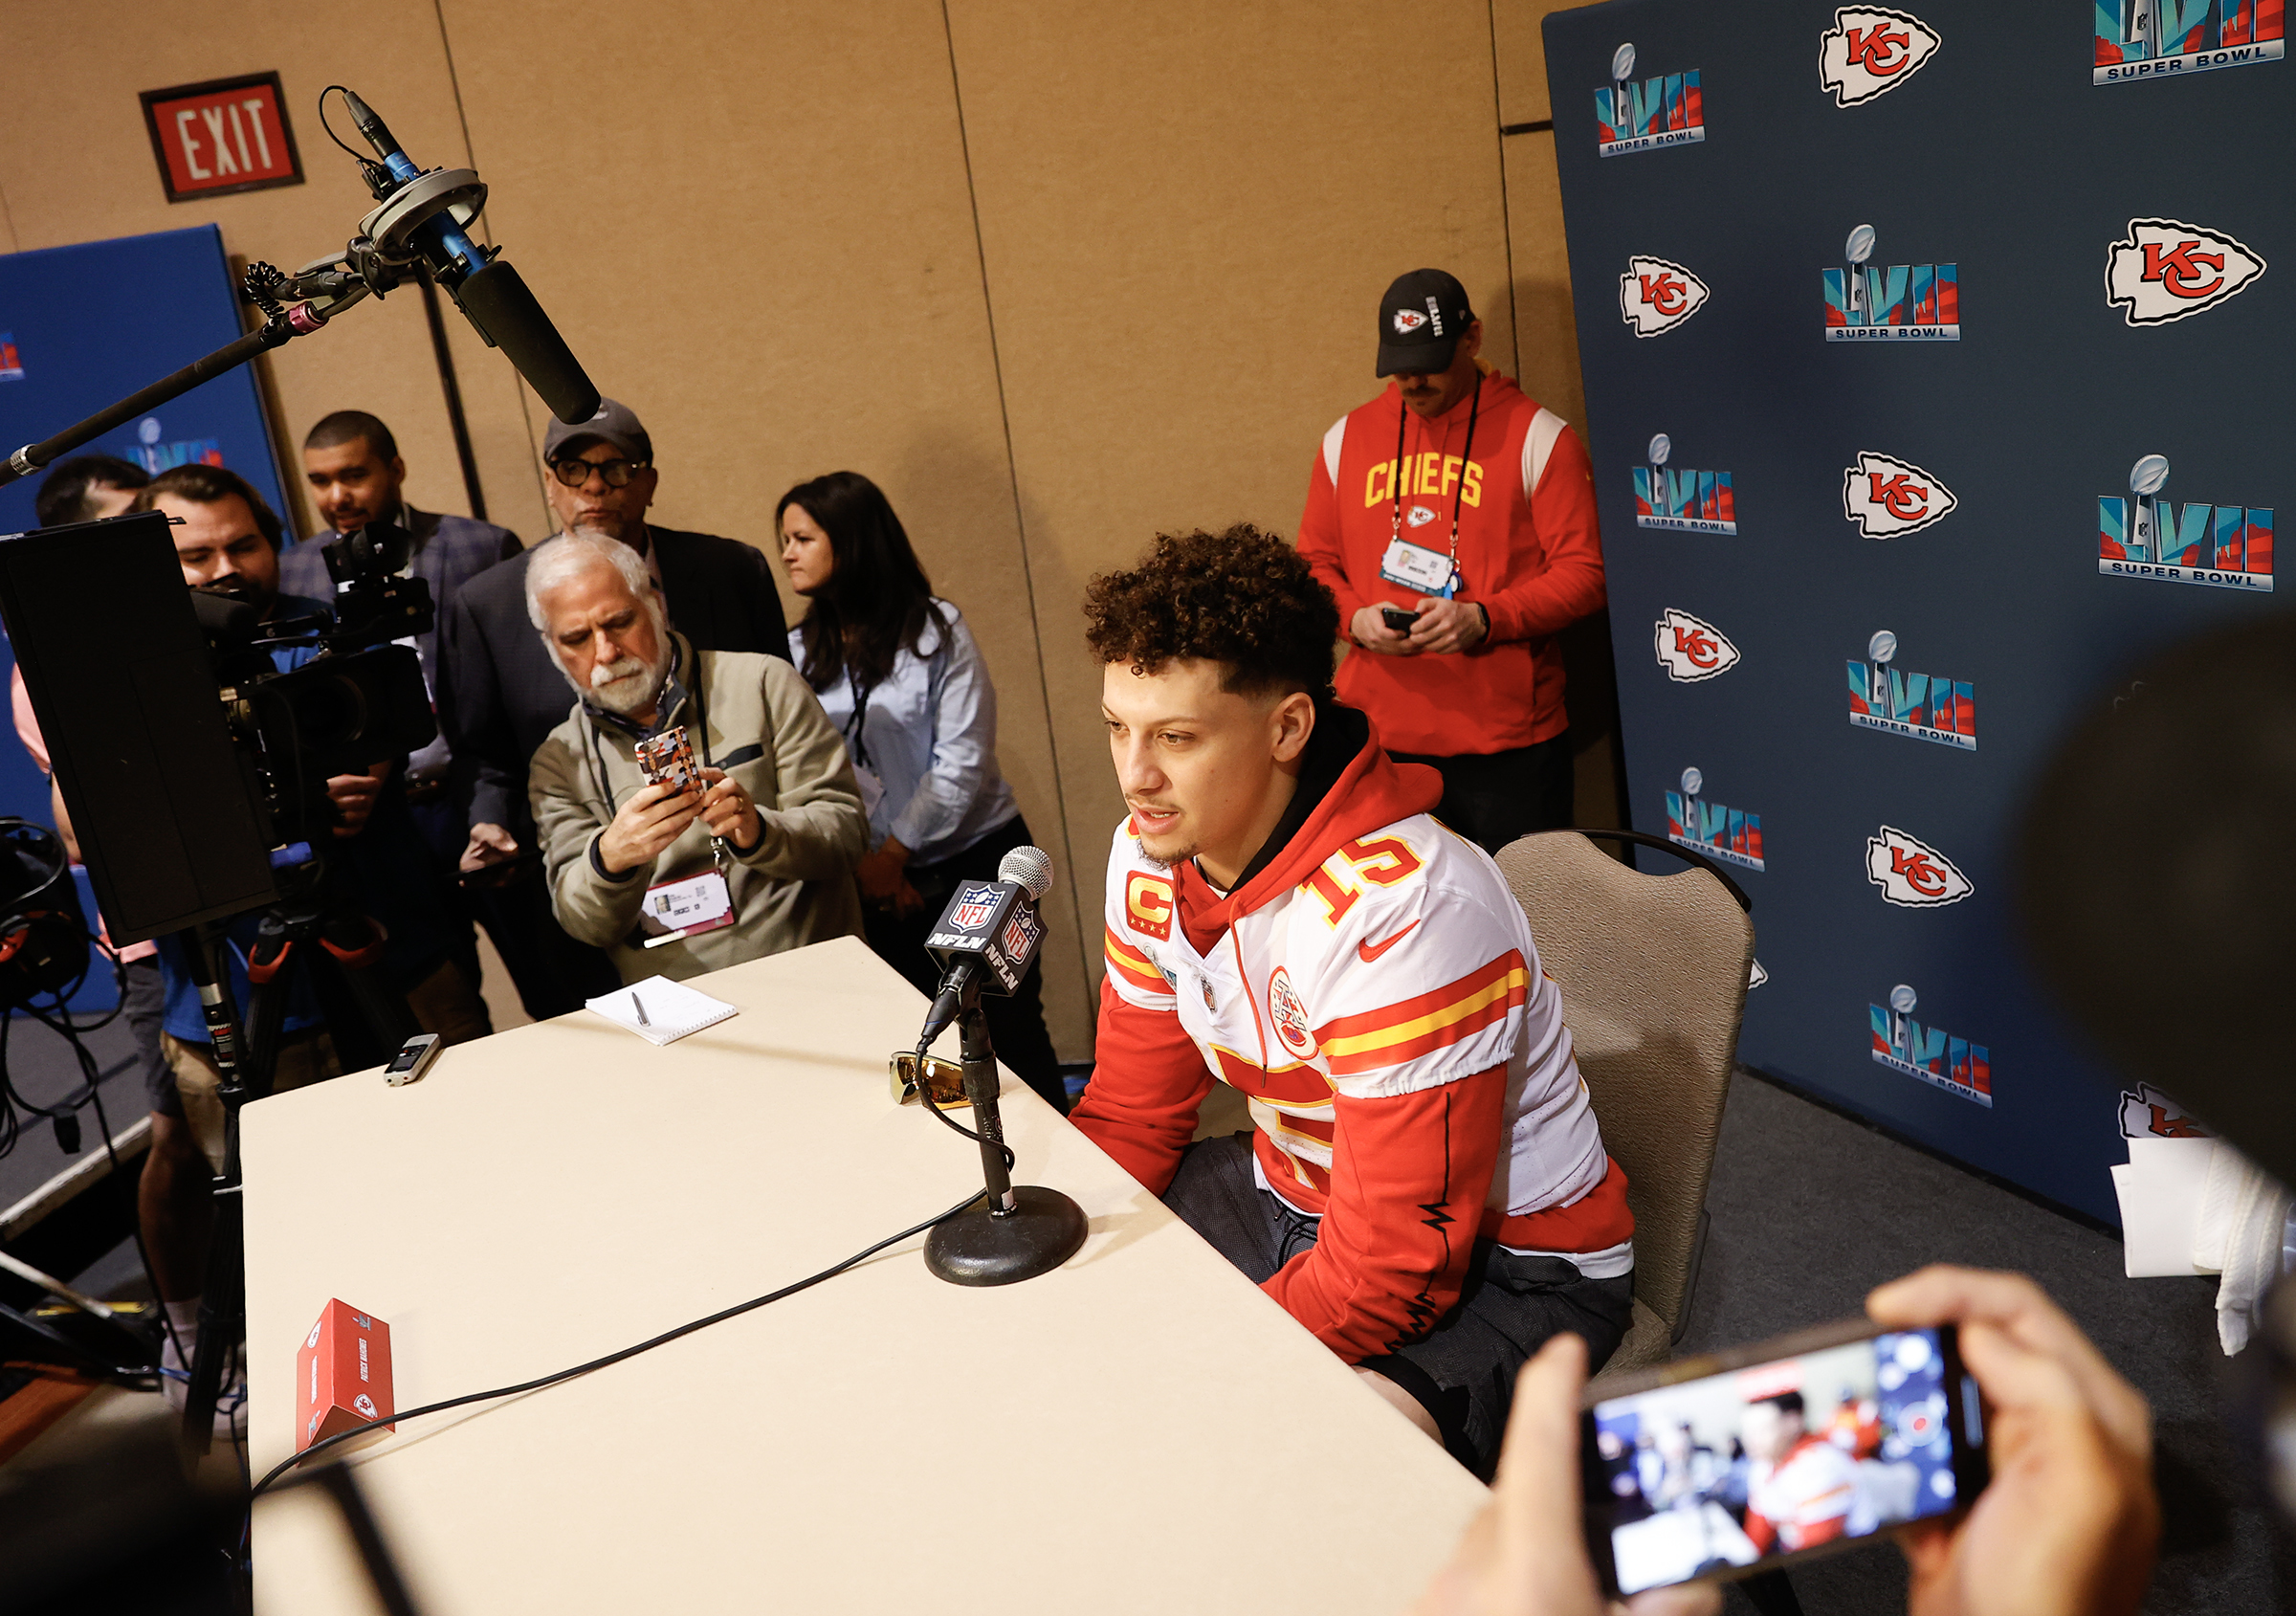 Patrick Mahomes can't be beaten in Super Bowl LVII if he dreams of